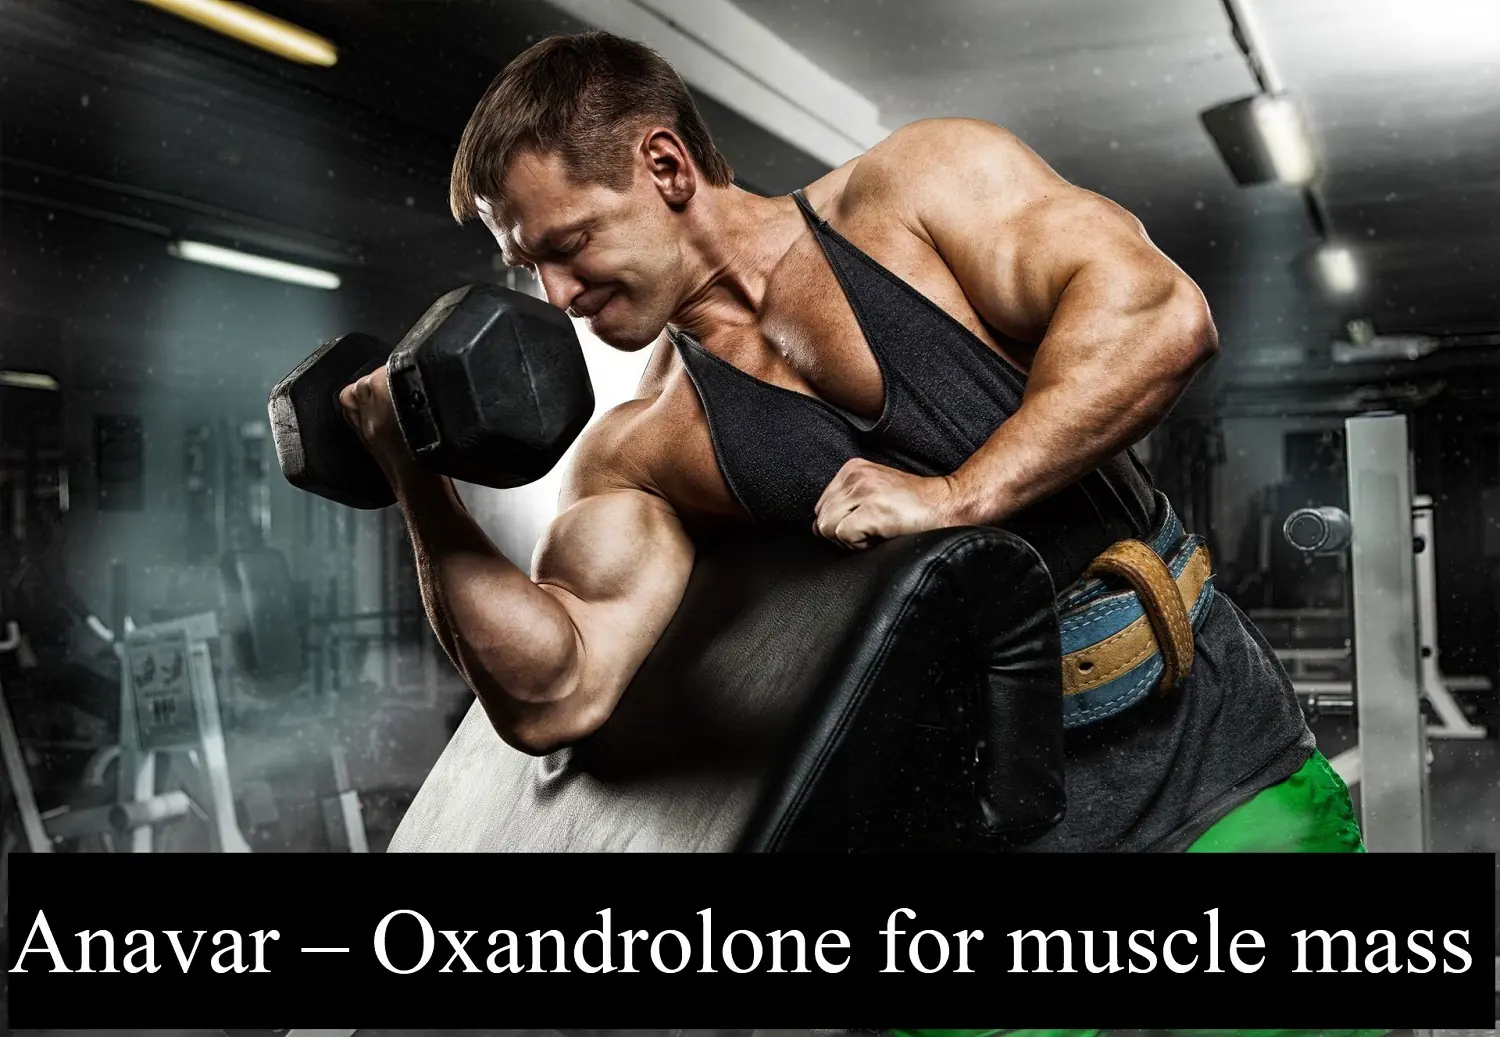 Anavar for muscle mass